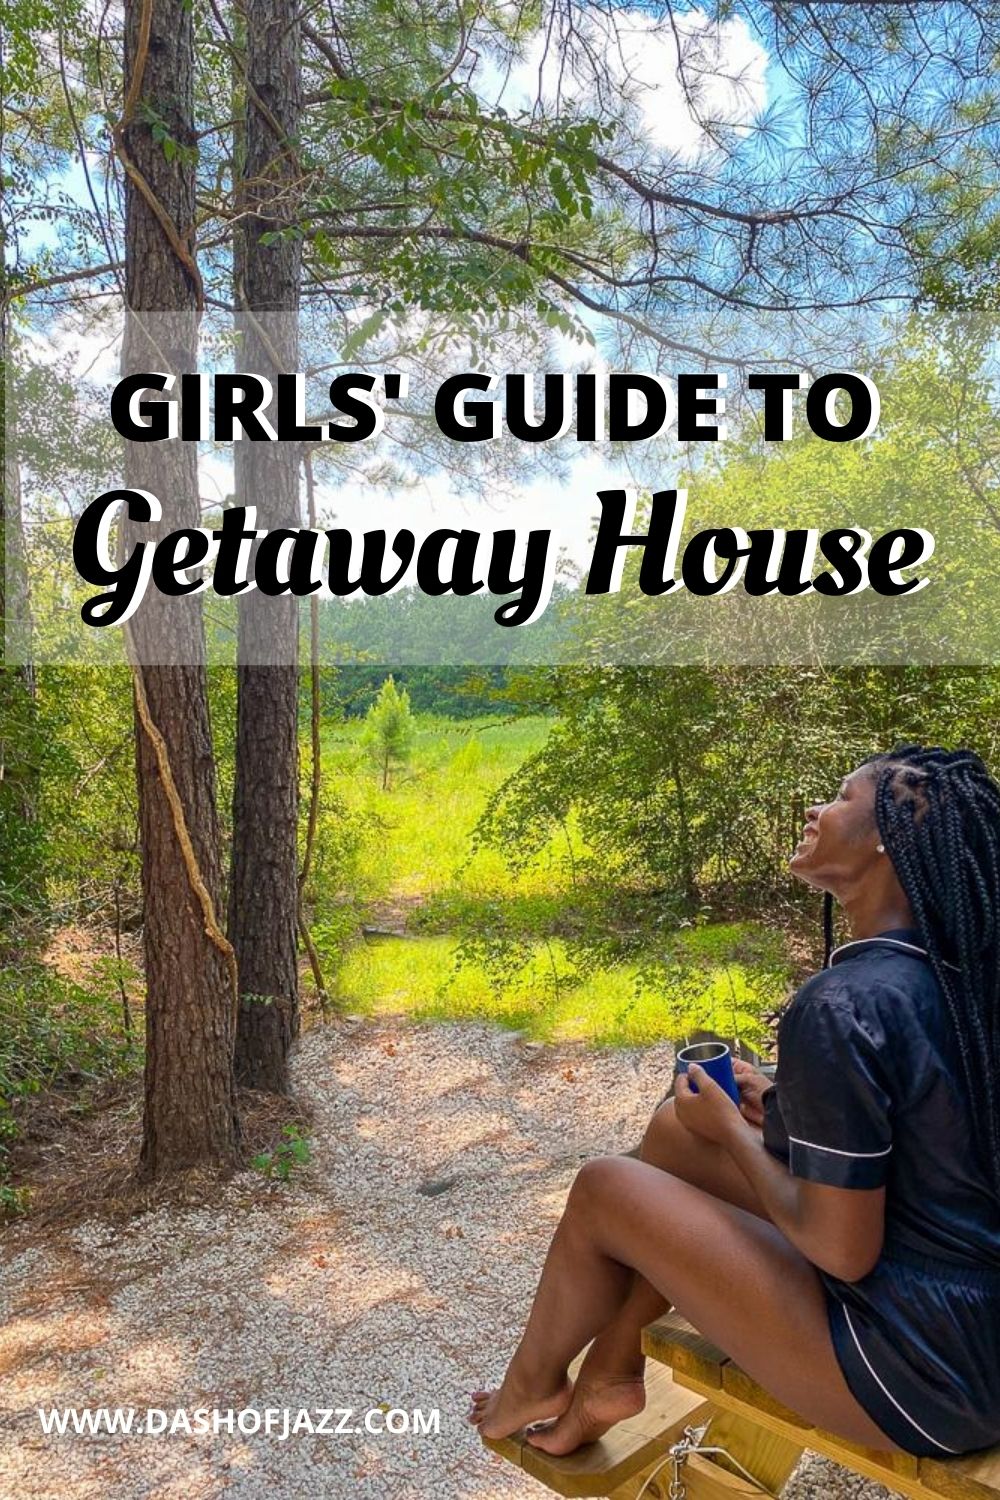 Jazzmine sitting outside Getaway Houston cabin with text overlay "Girls' Guide to Getaway House"